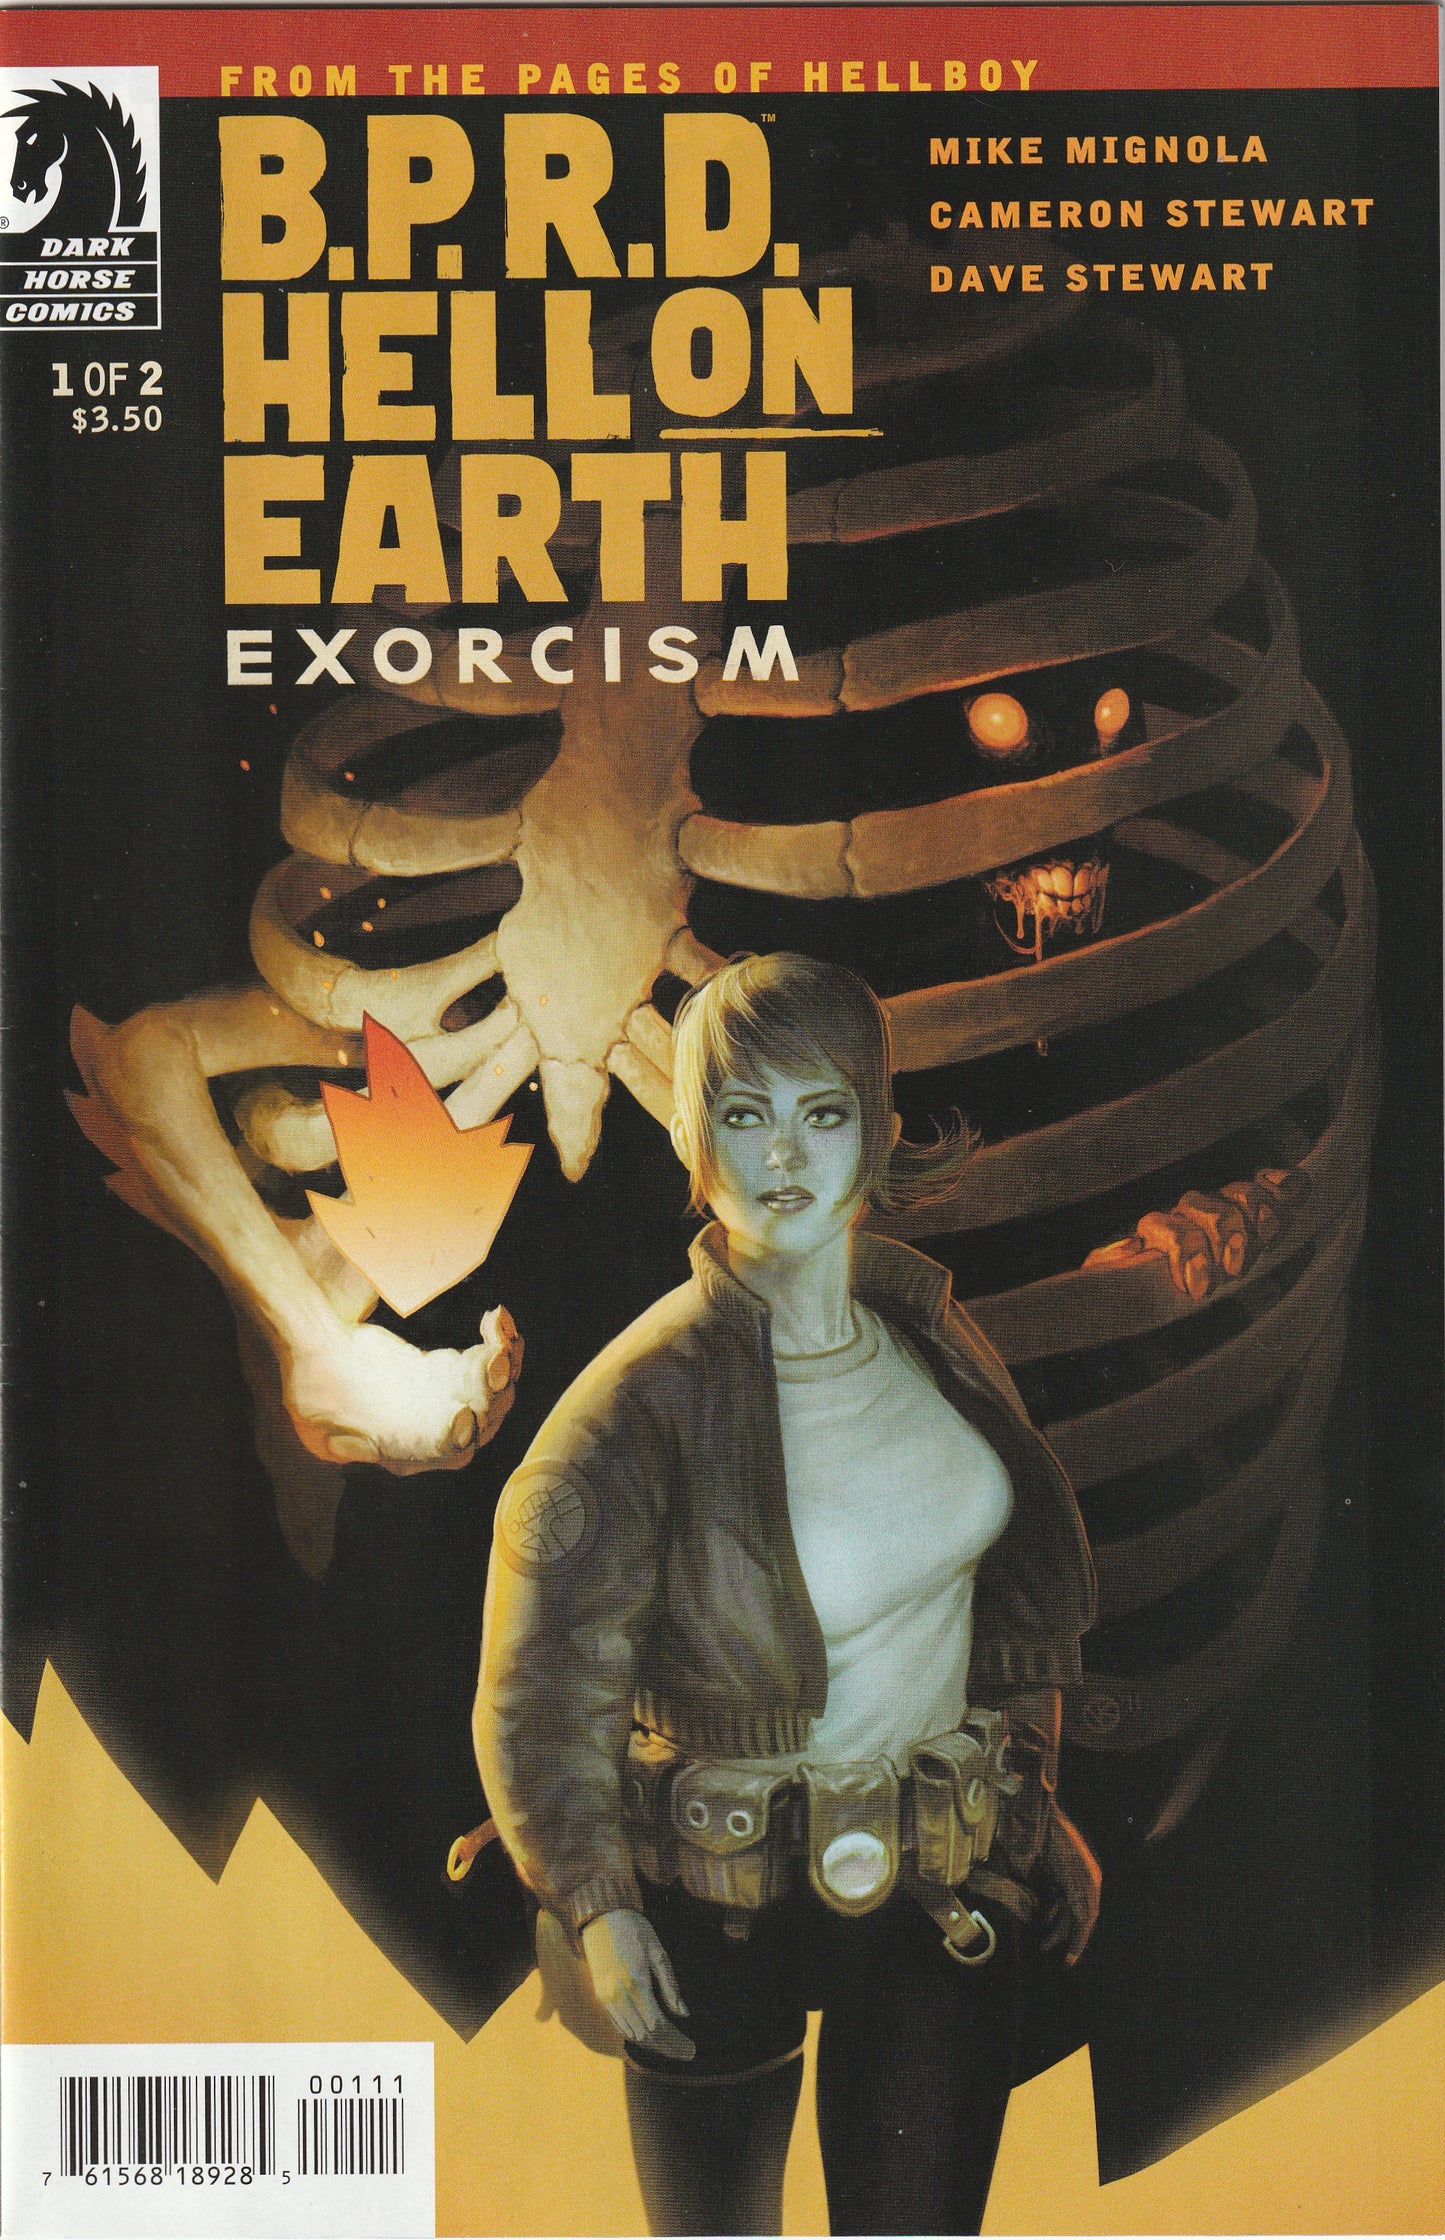 B.P.R.D. Hell on Earth: Exorcism (2012) - 2 issue mini series